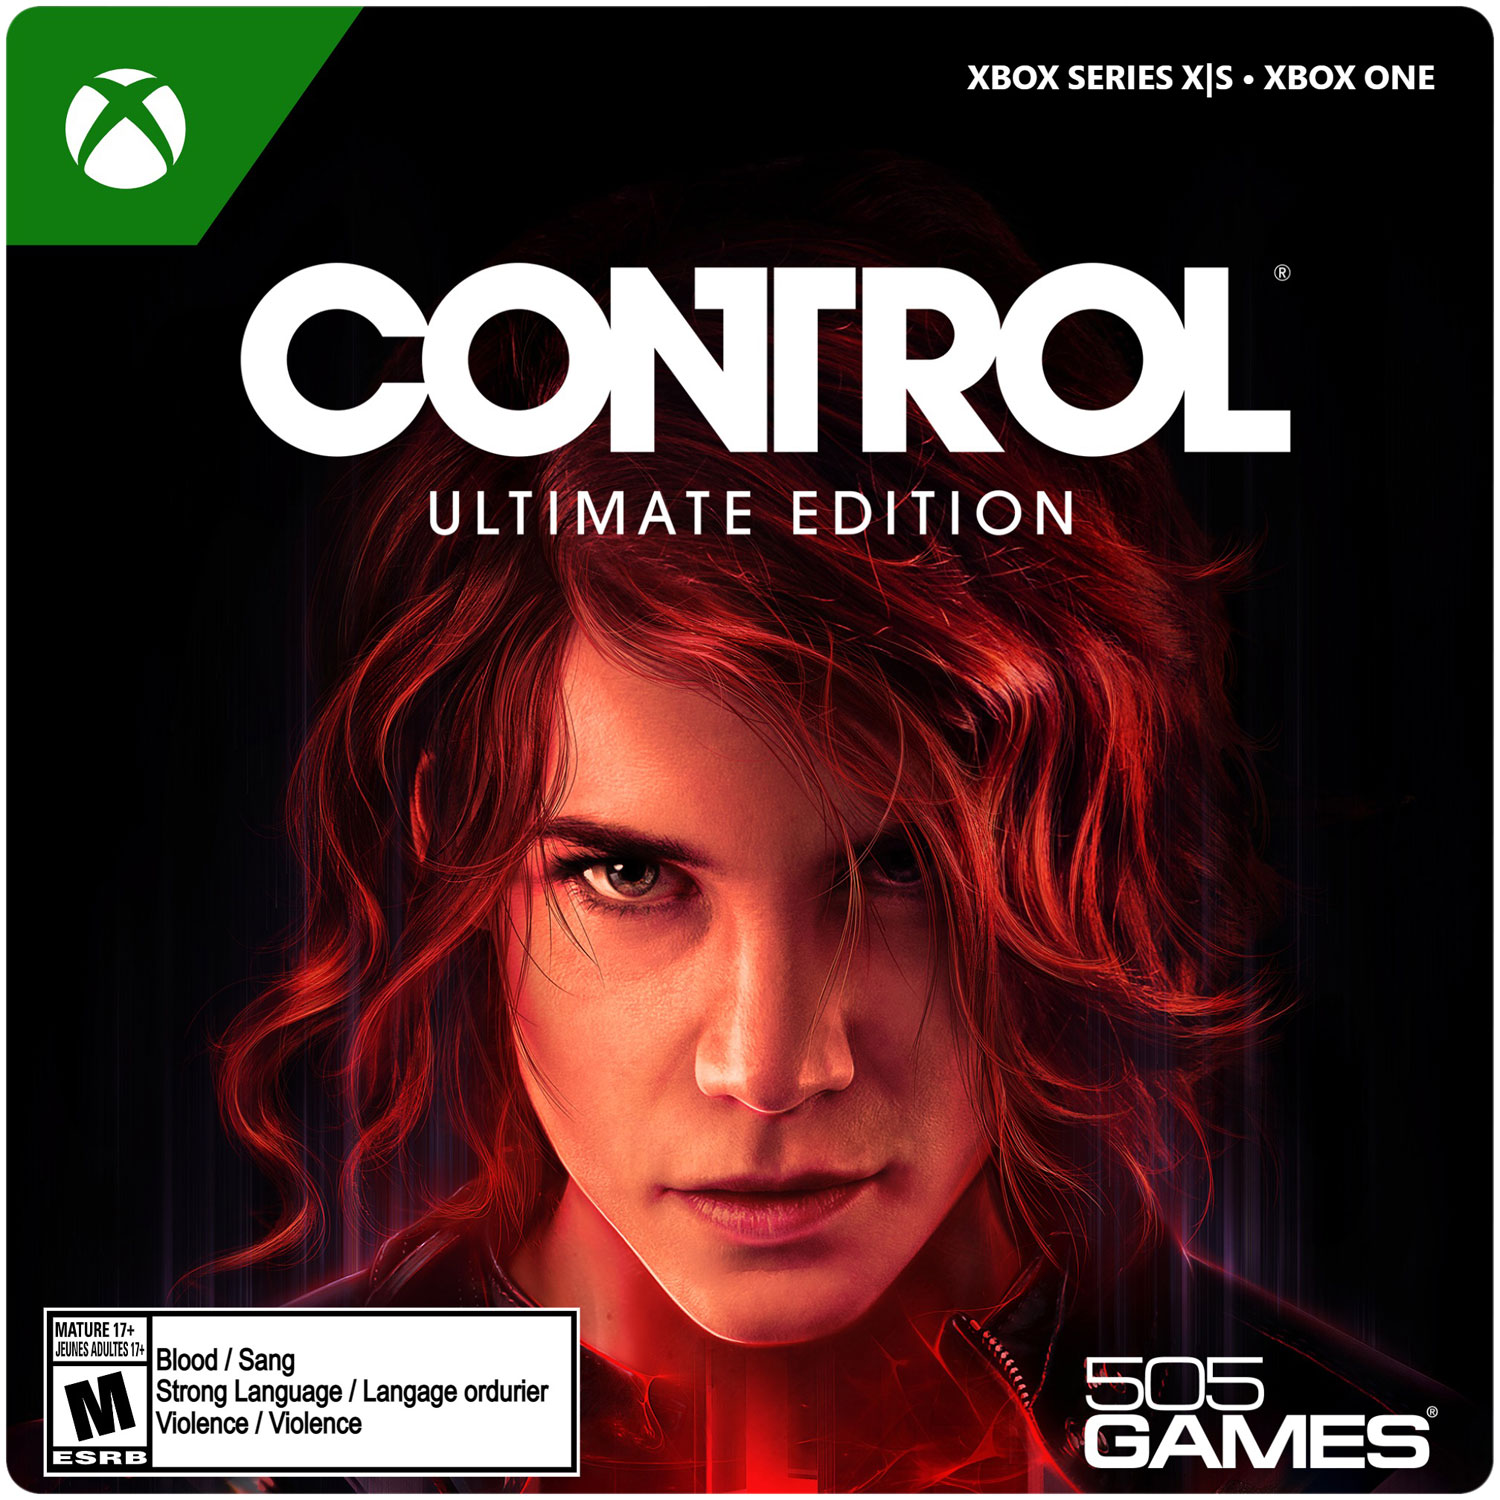 Control Ultimate Edition (Xbox Series X|S / Xbox One) - Digital Download